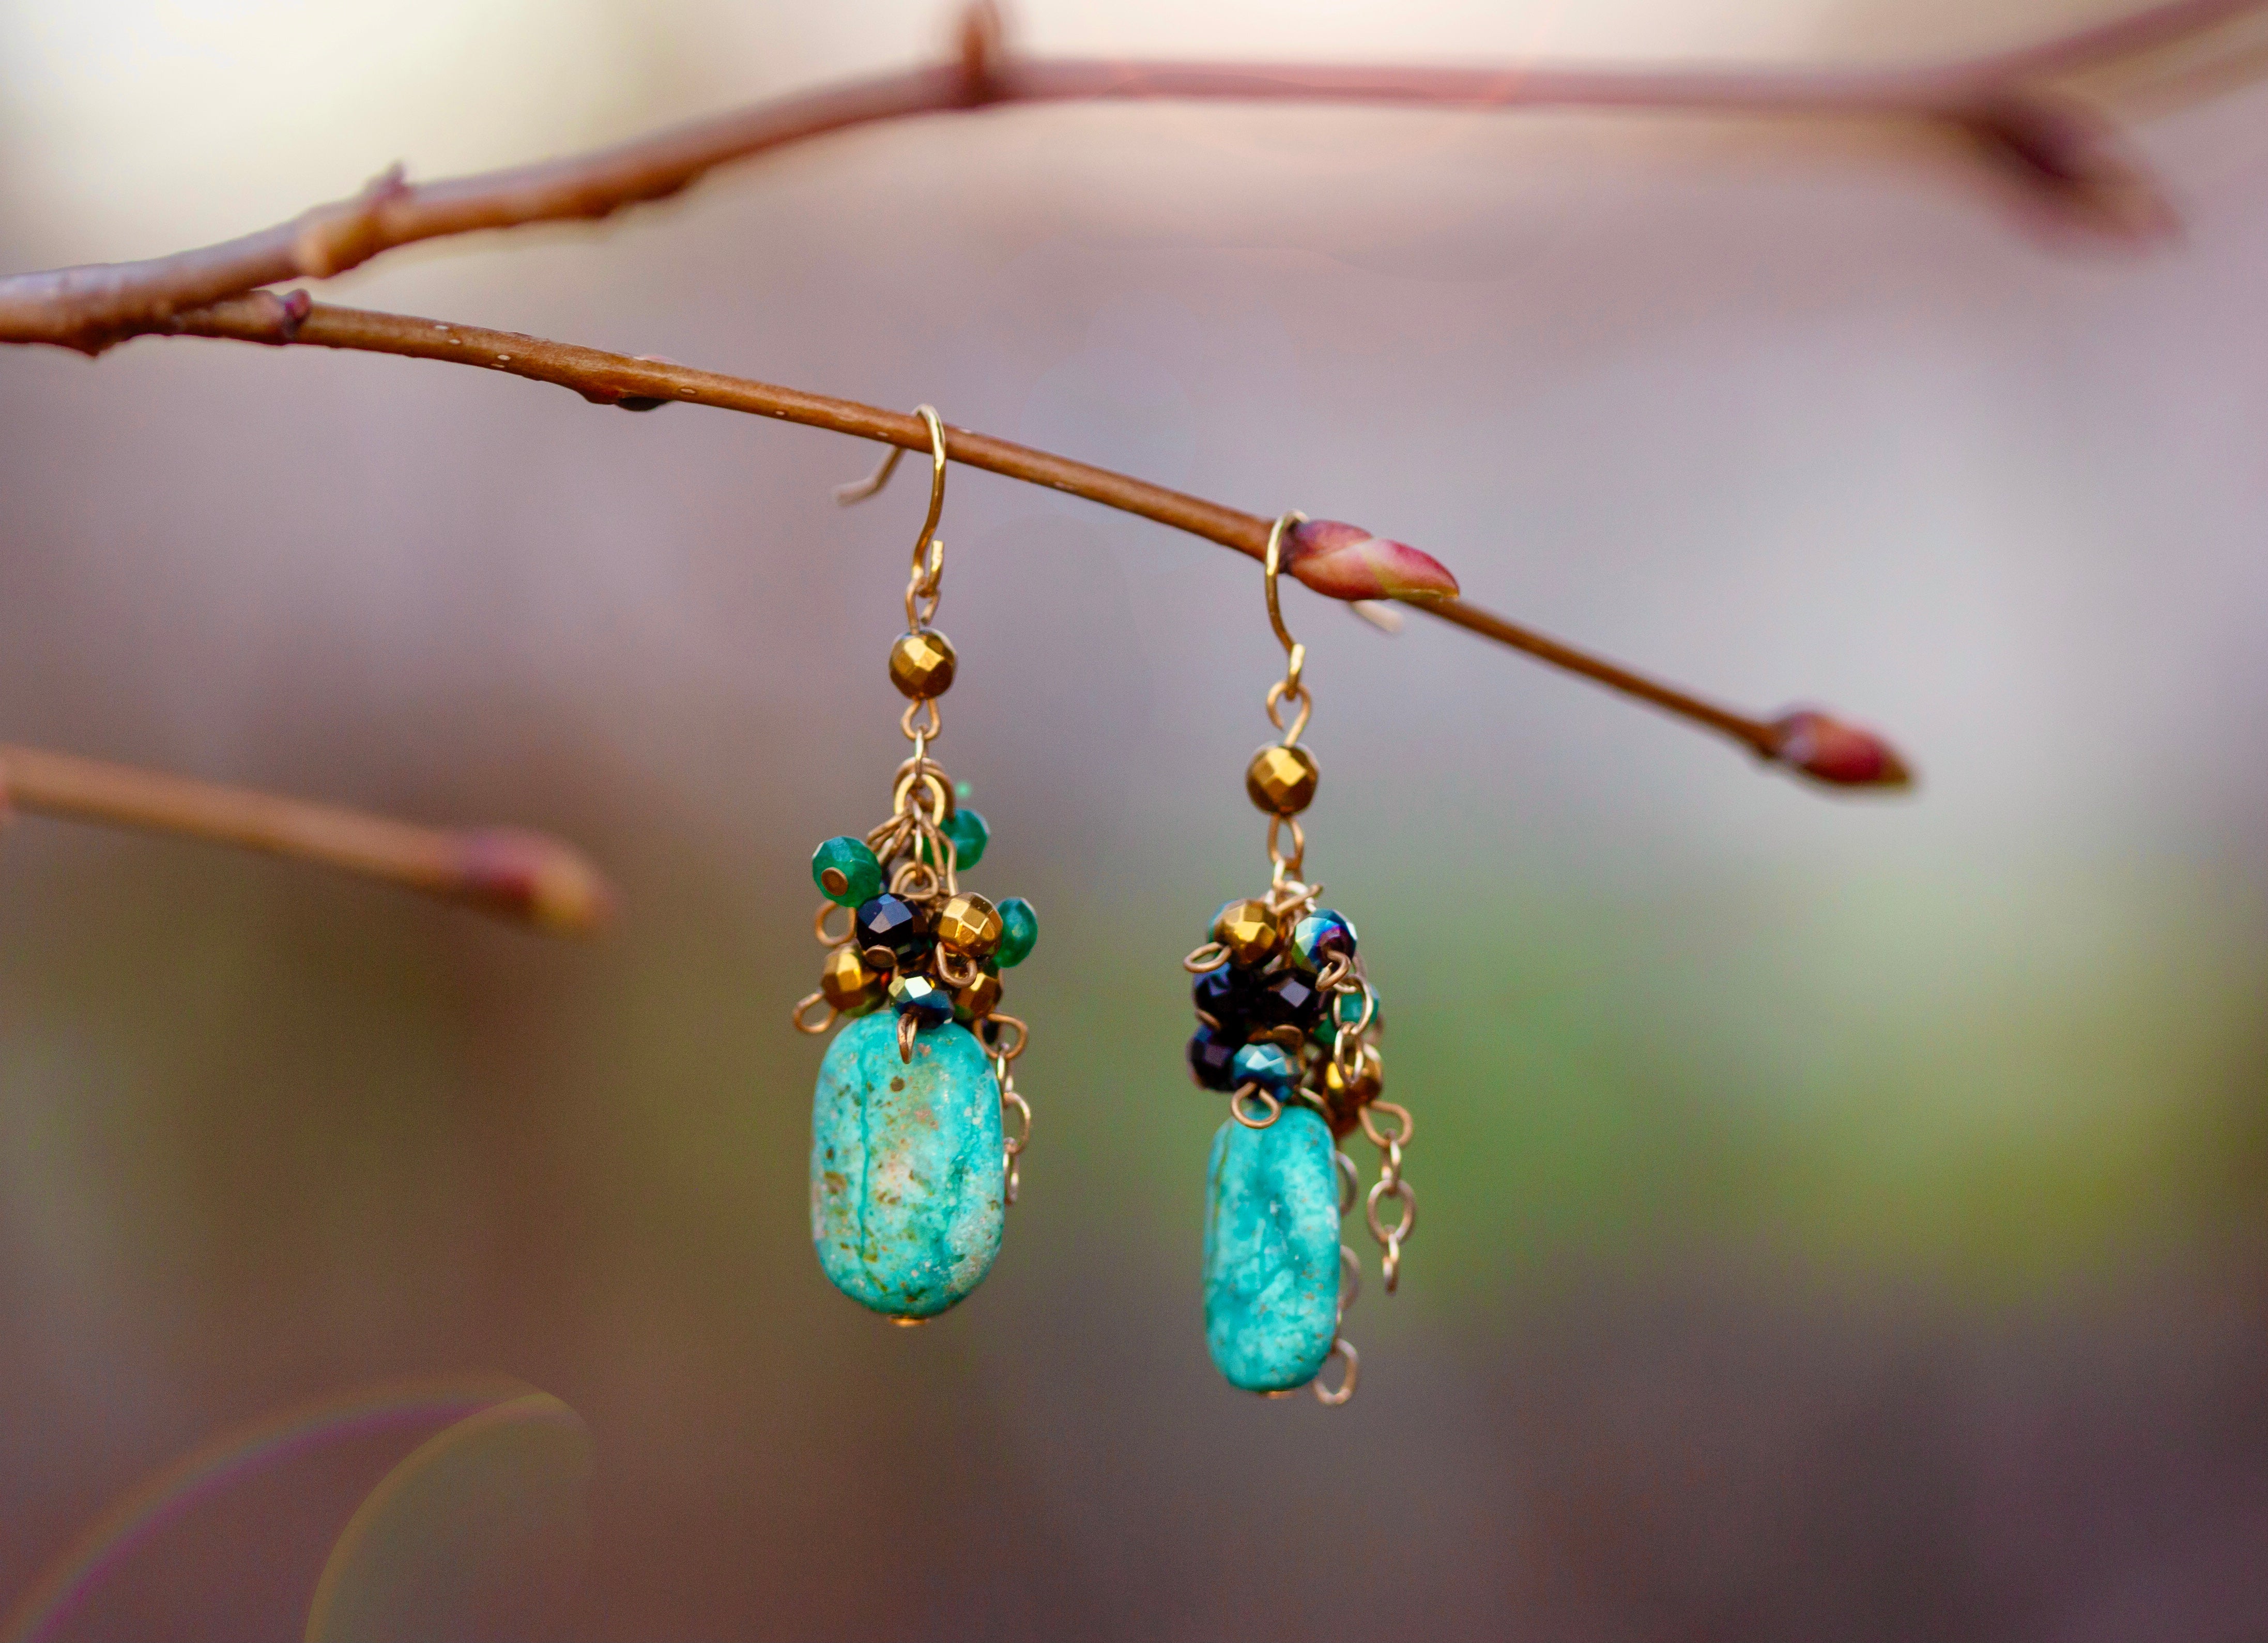 Pebbles by the Pond - Turquoise Gemstone Earrings